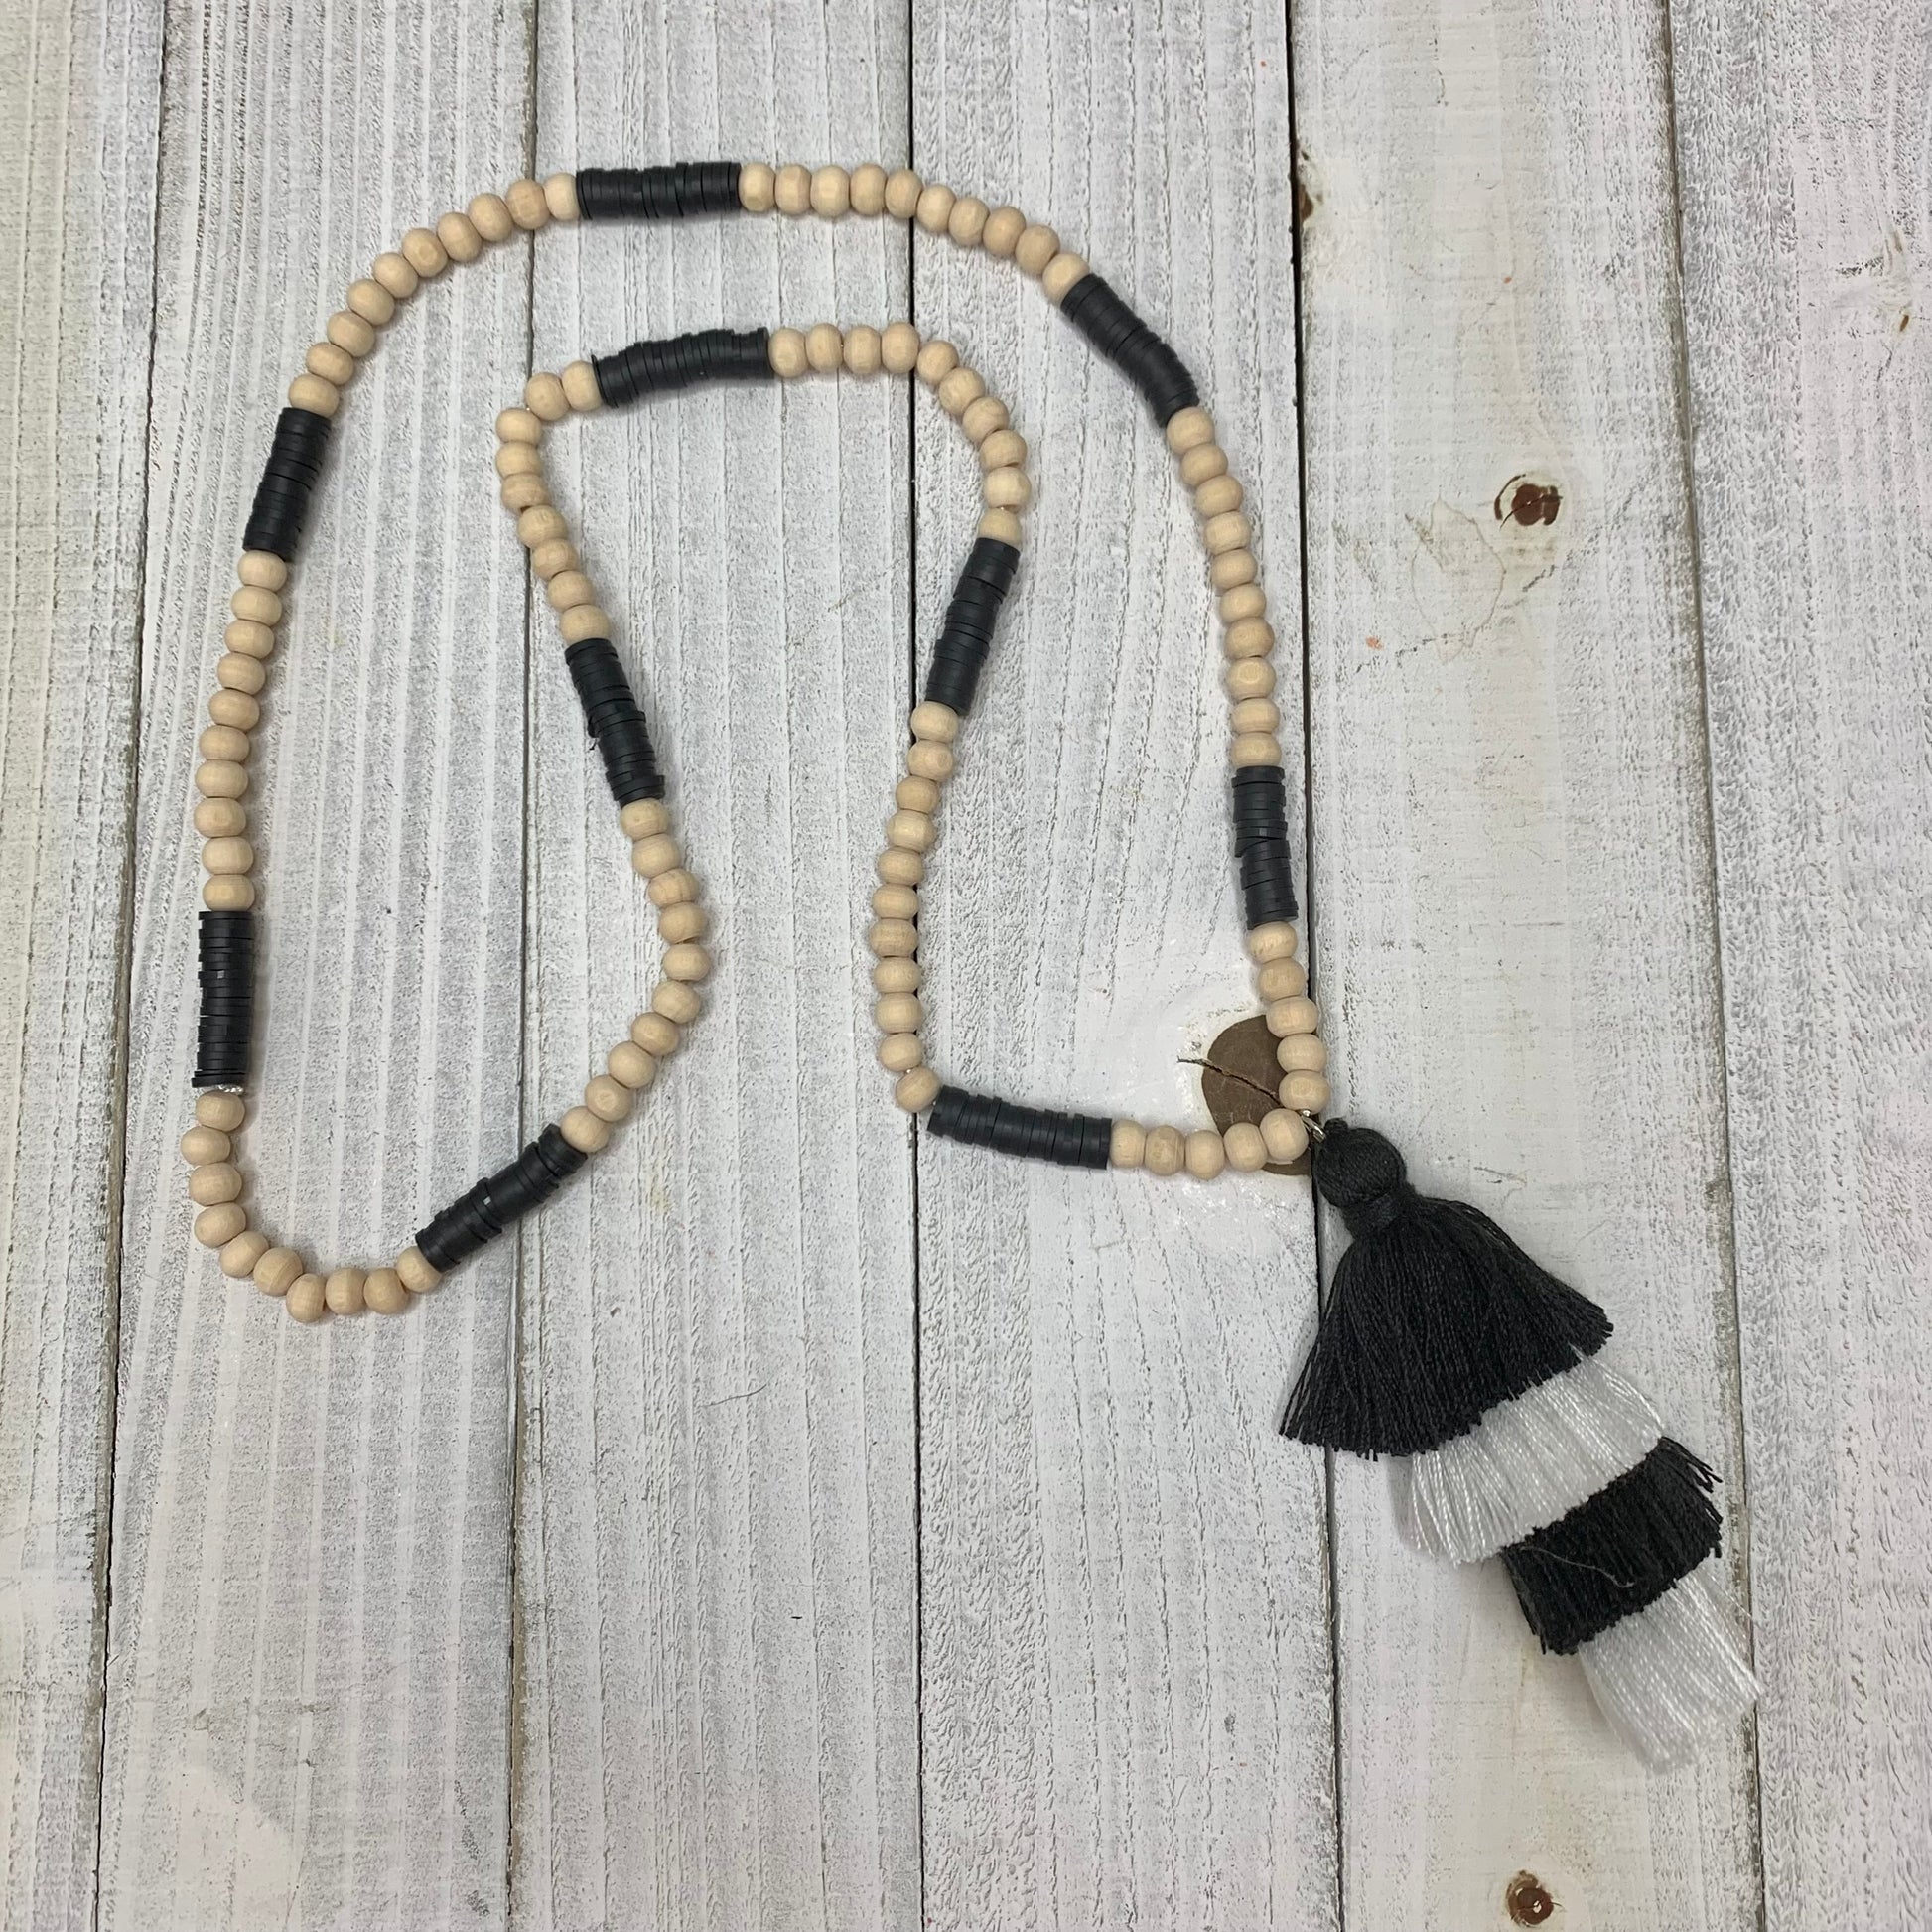 Wooden Round Beads, Black Doughnut Beads with a Cotton Tassel Necklace